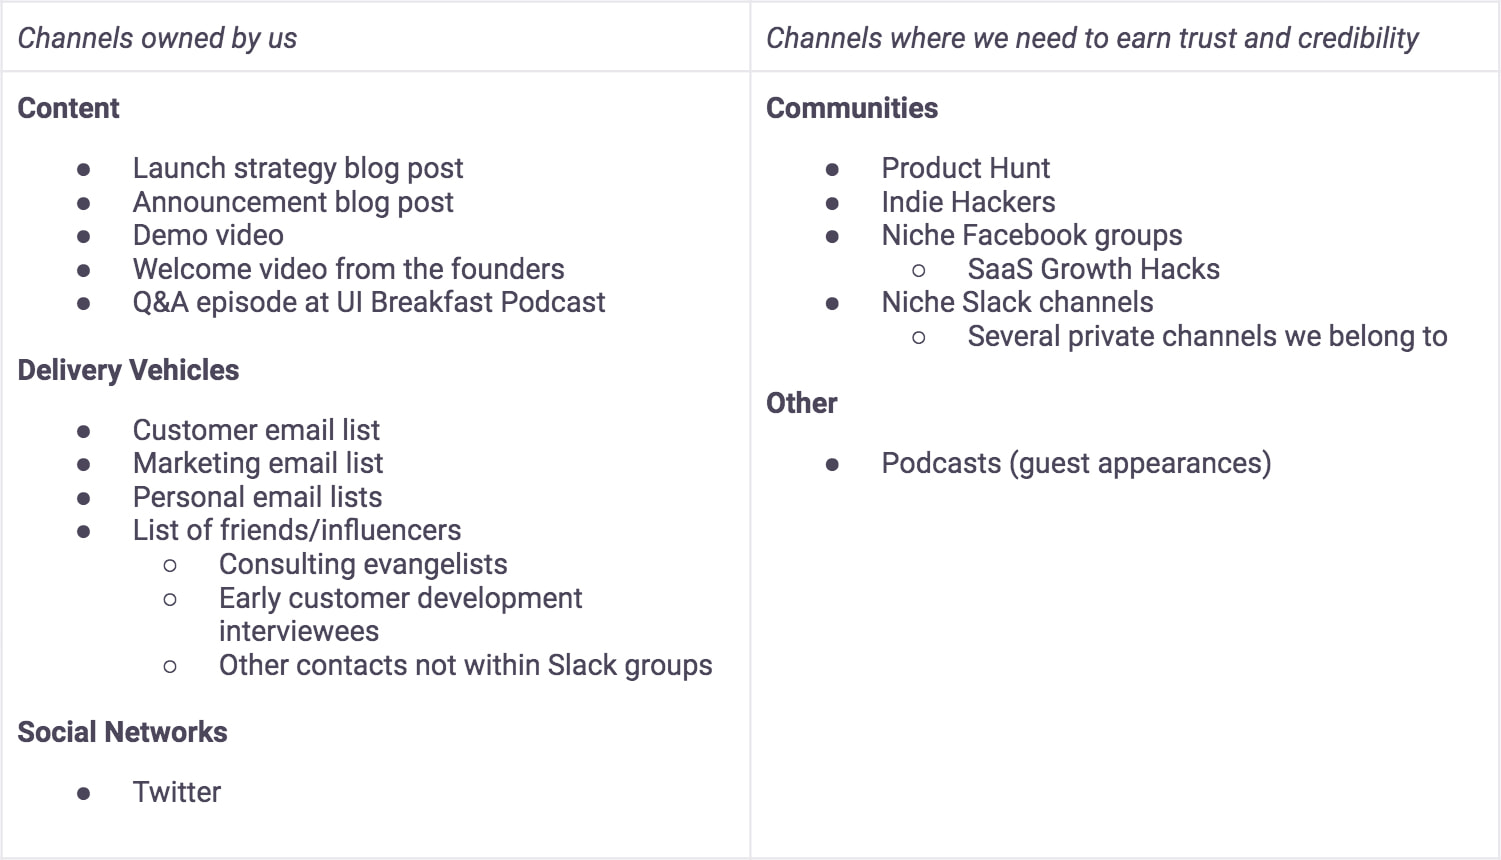 Behind the Scenes of Our Upcoming Public Launch: Screenshot of a table containing the customized List of launch channels